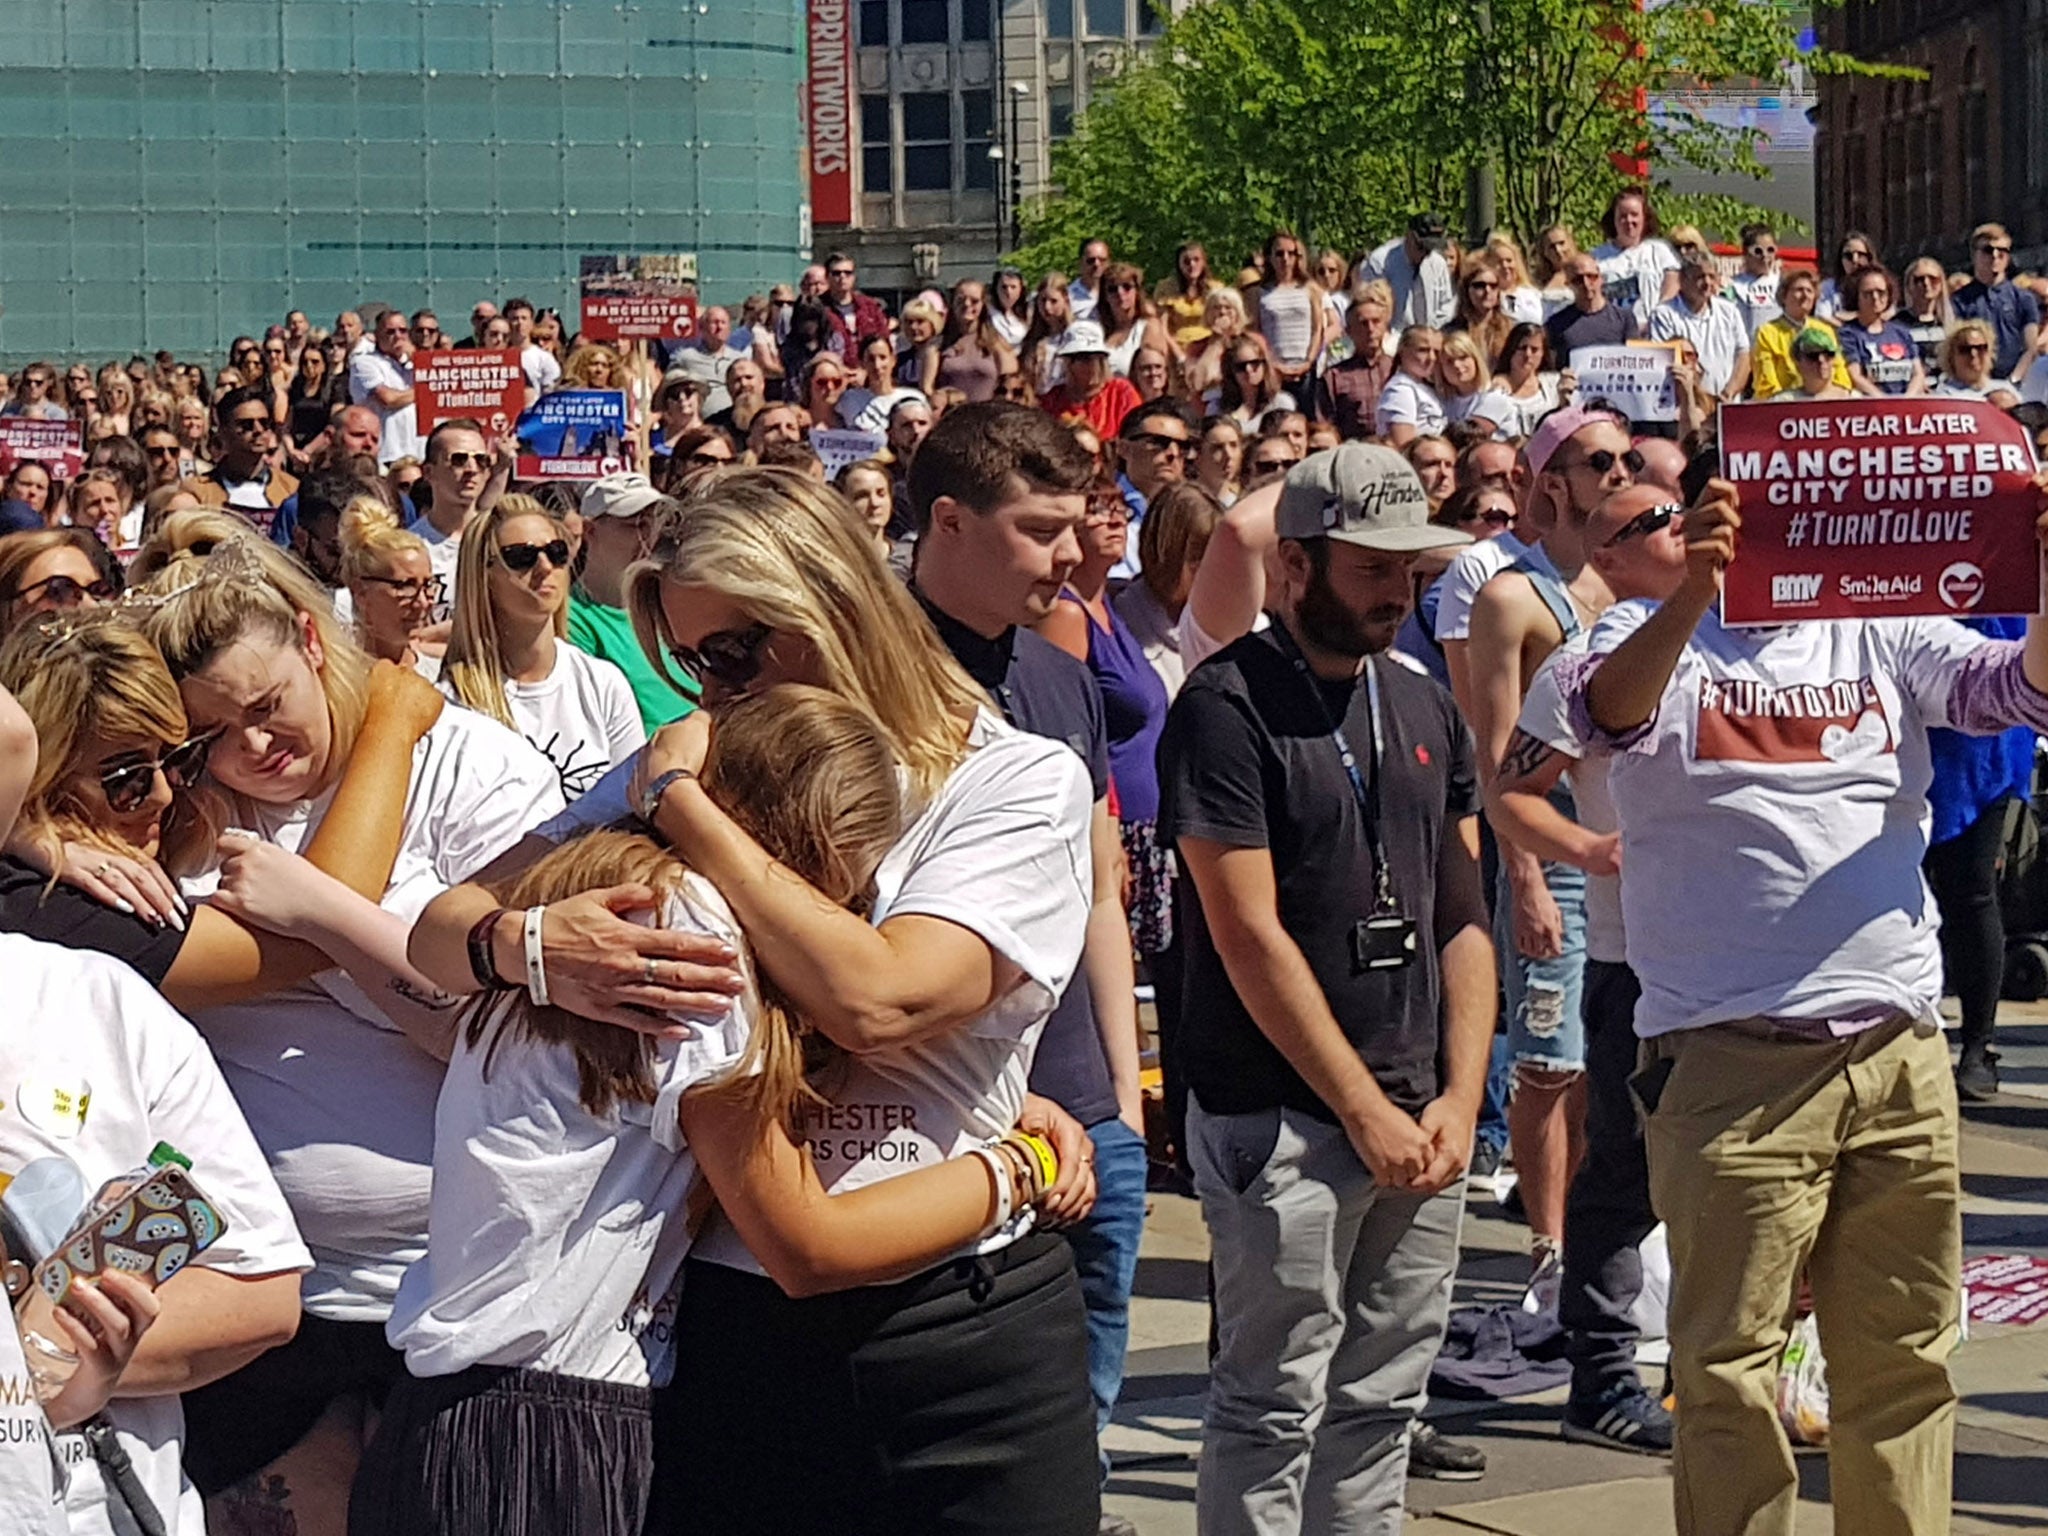 &apos;We are proud of our city&apos;: Thousands come together across Manchester to mark anniversary of bomb attack